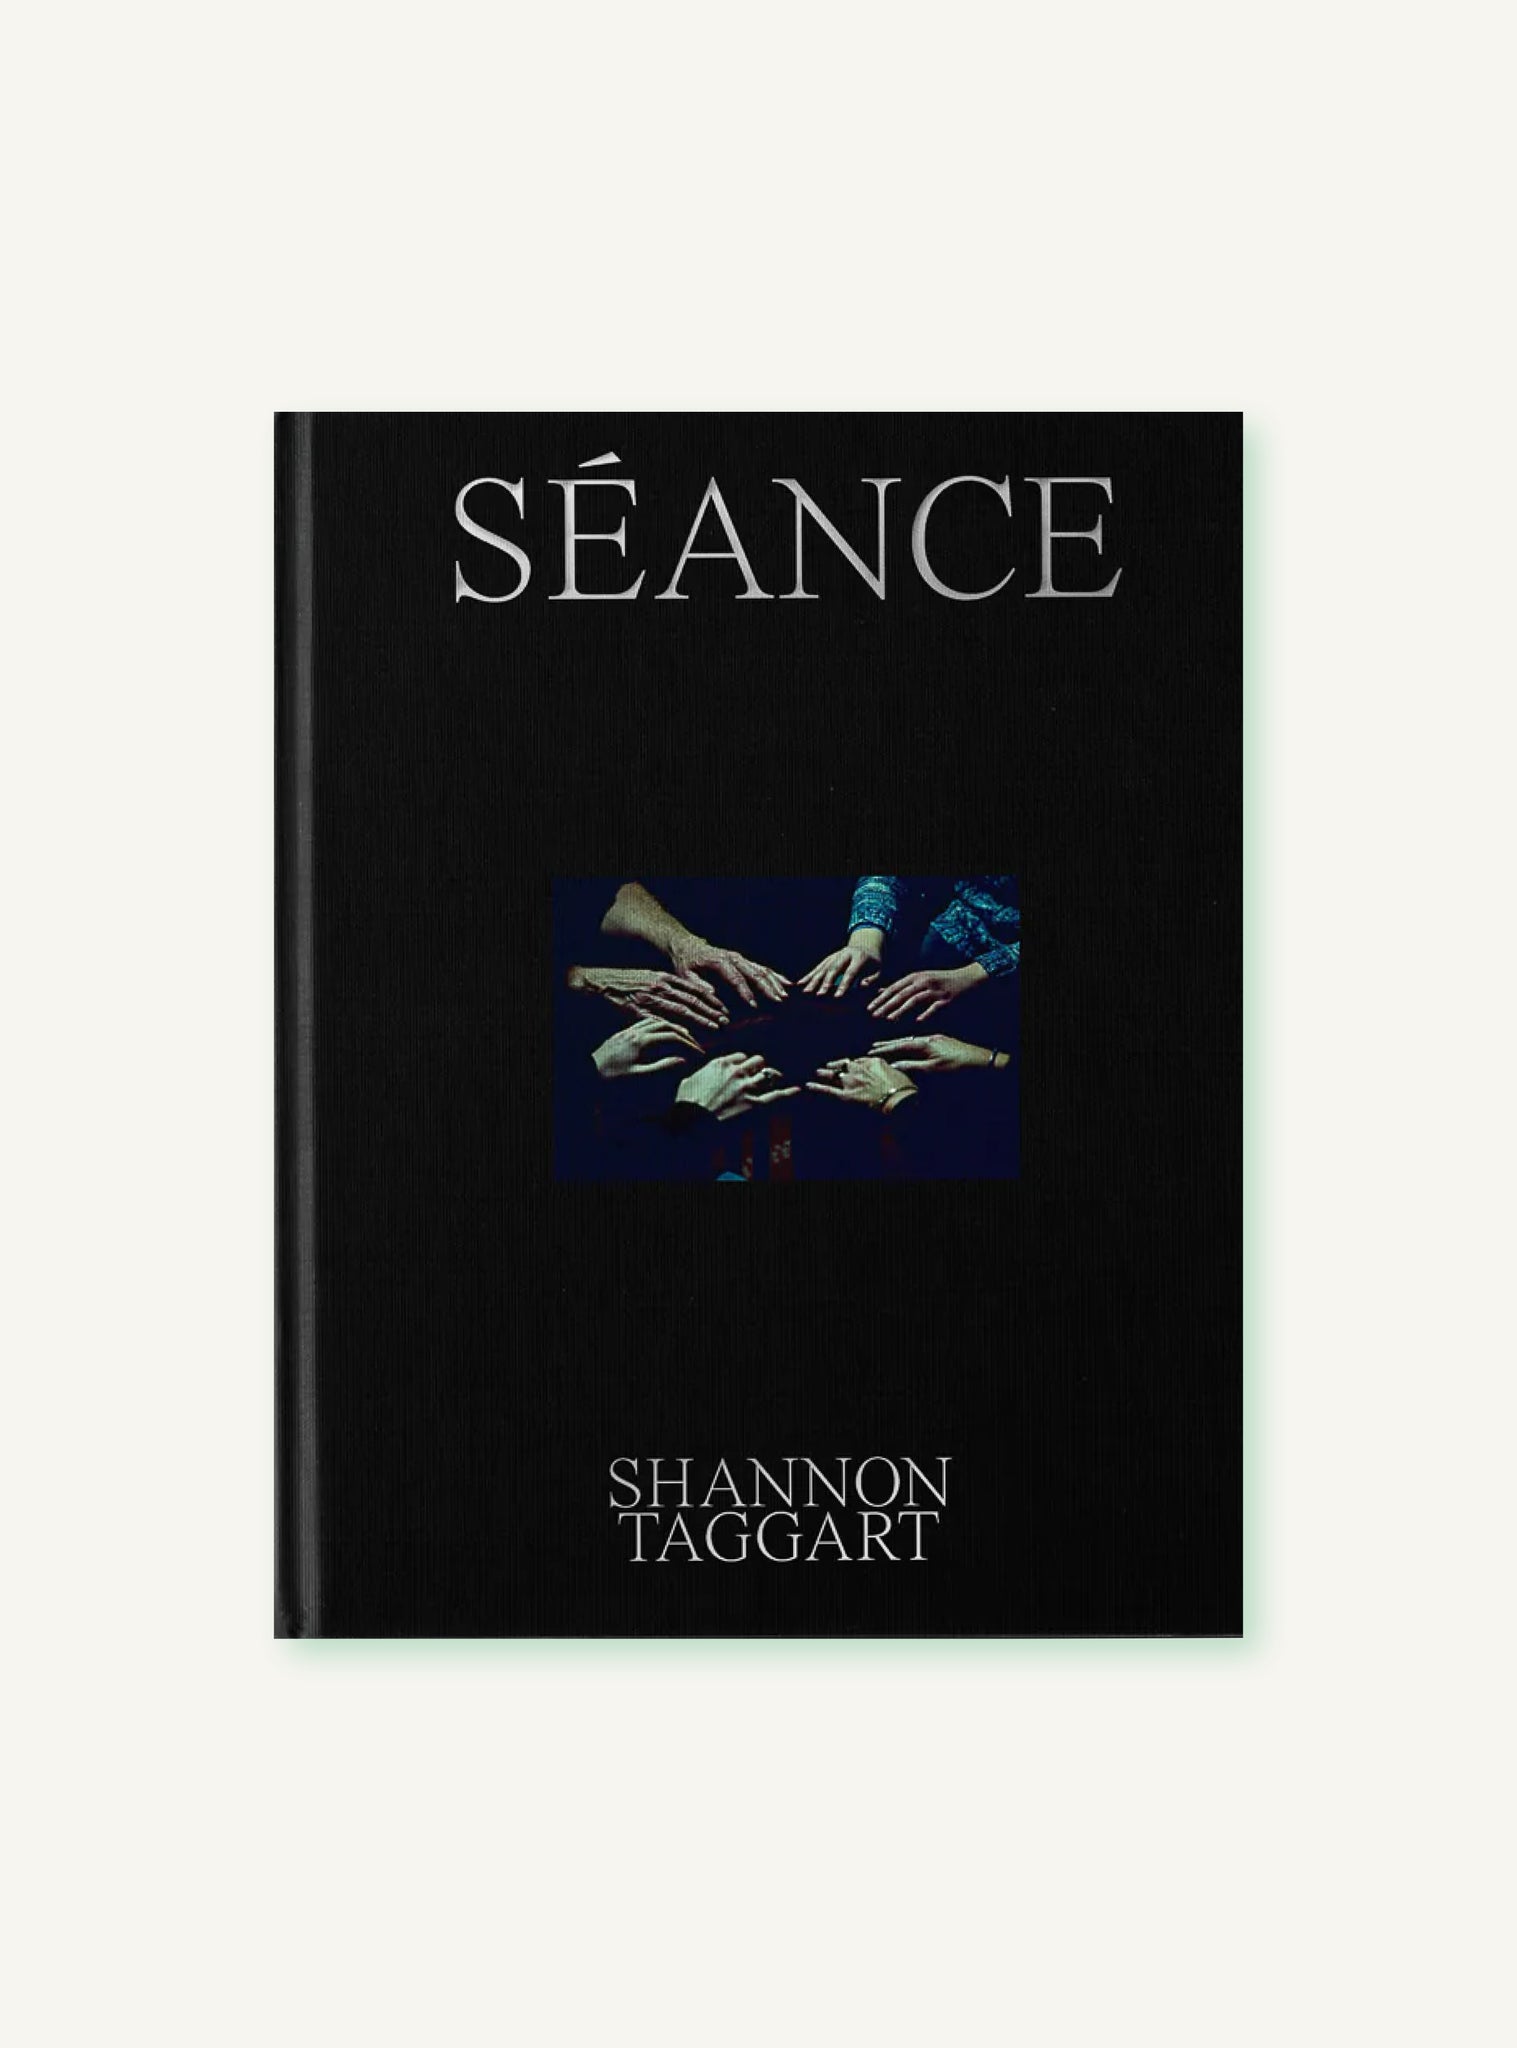 SÉANCE by Shannon Taggart